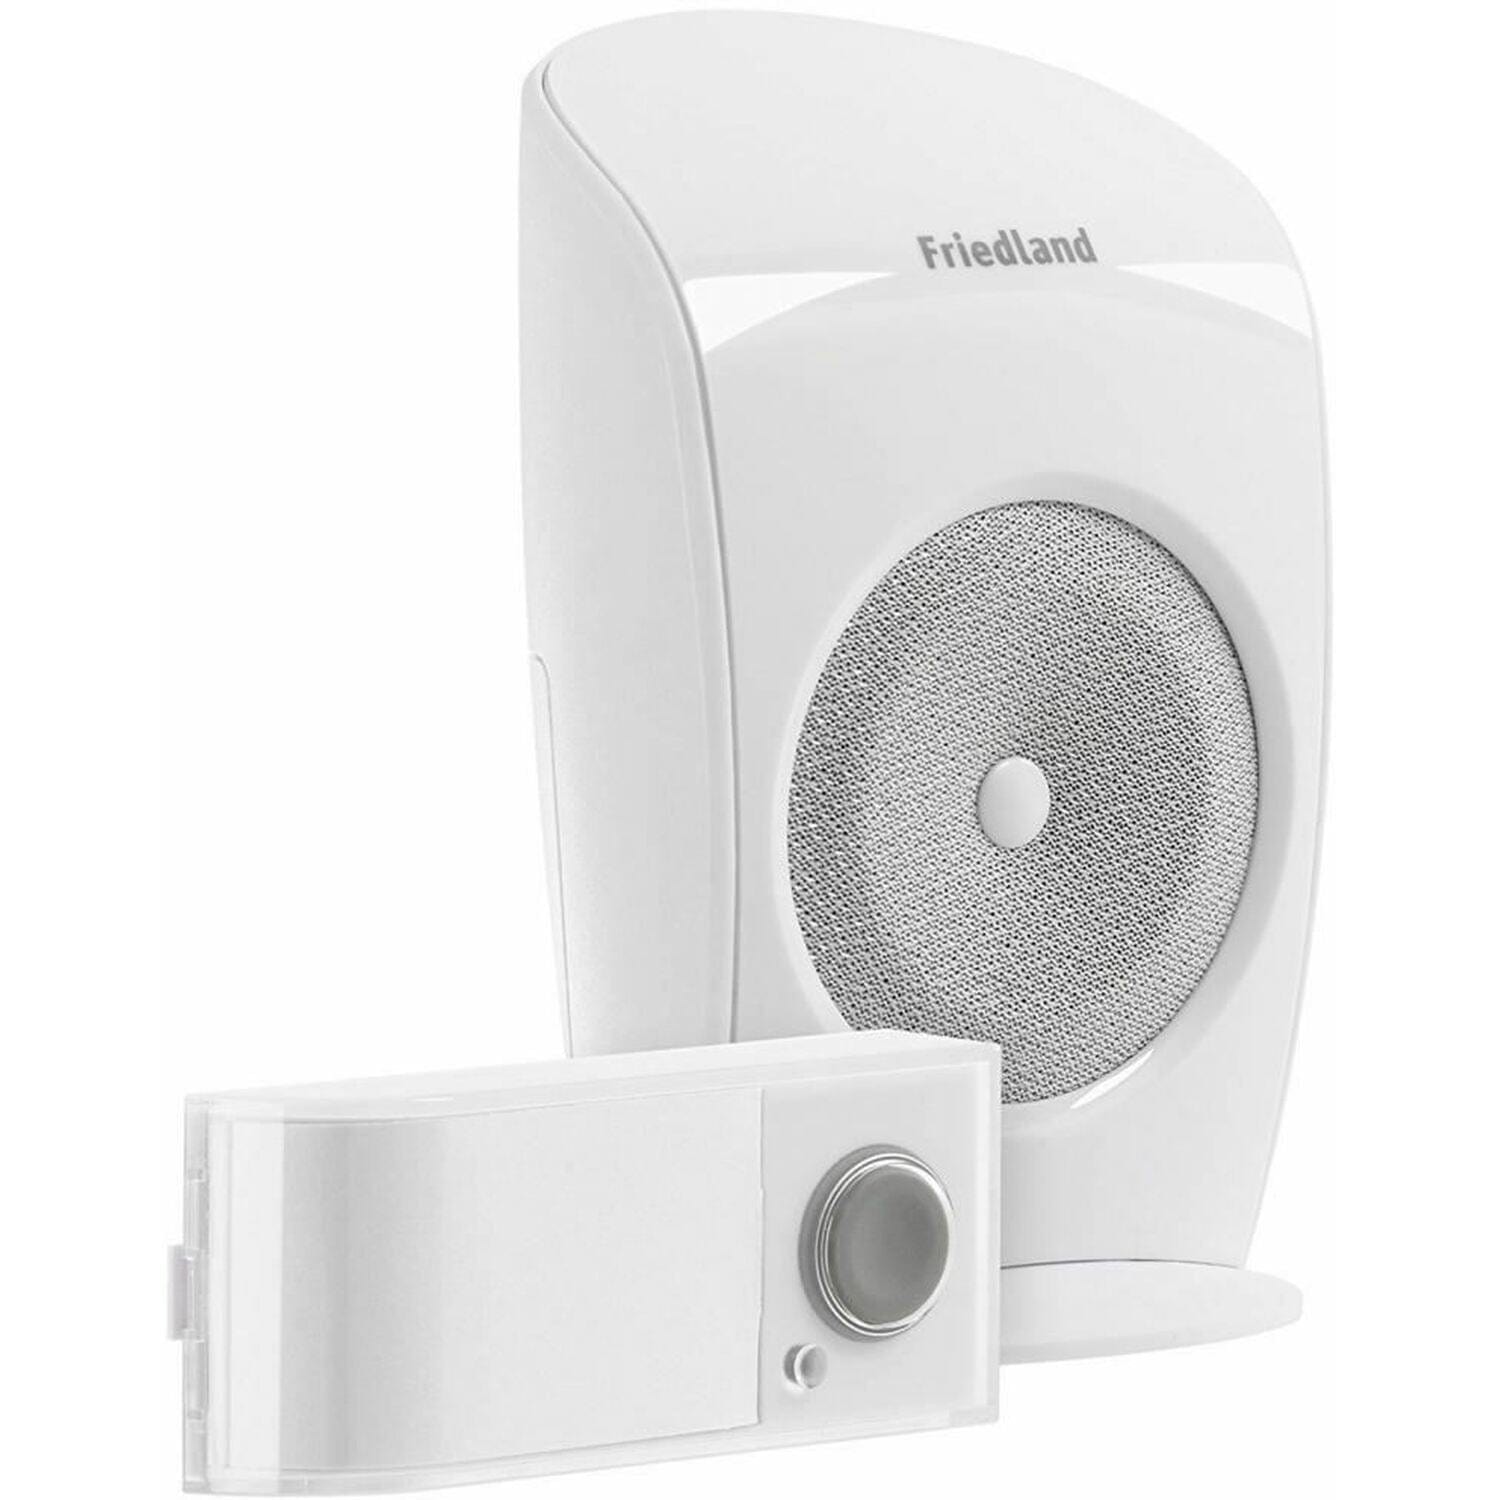 Friedland White Wireless Door Chime Kit with Push Bell | Wire-Free Doorbell Set - Supply Master Accra, Ghana Security & Surveillance Systems Buy Tools hardware Building materials